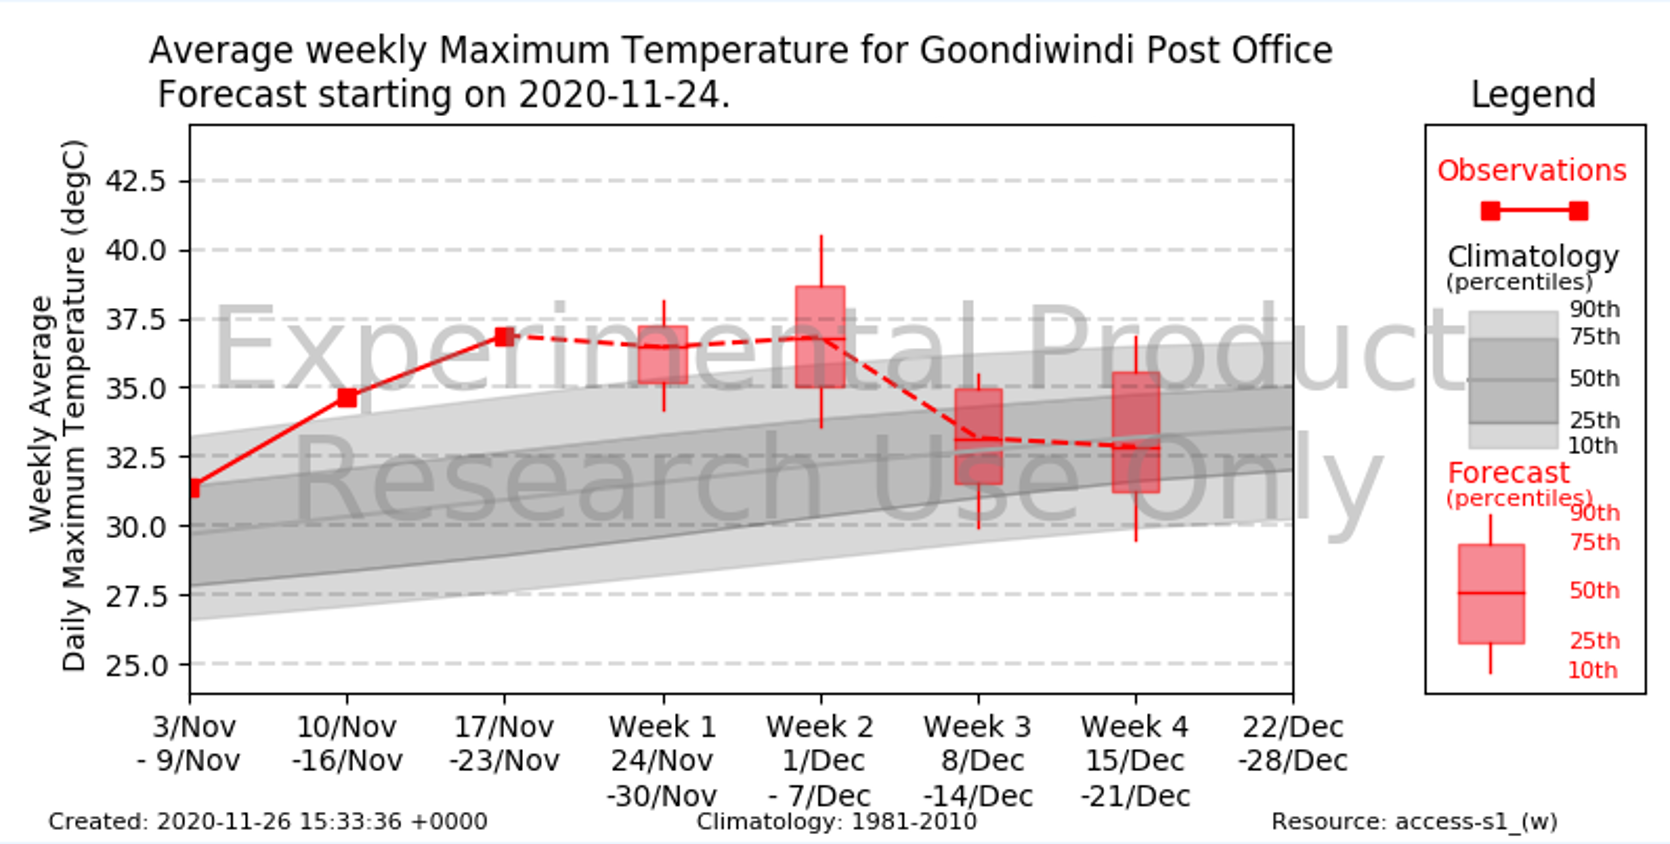 This figure is a timeseries of observed (red solid line) and forecast (red box plots) maximum temperature (y-axis) for consecutive weekly periods (x-axis) for Goondiwindi. The box plots indicate the range in the expected outcomes from the forecasts. The grey shading indicates the usually expected temperatures for that time of year (based on 1981-2010). The thresholds shown for the box plots and the grey shading are the 10th, 25th, 50th (median), 75th and 90th percentiles. For example, Week 1 (24-30 November 2020) is forecast to have a weekly mean maximum temperature of around 37°C (the median of the forecasts), which is much warmer than usual (e.g., the median line of the box is well above the median line of the grey shading and is even higher than the 90th percentile of usually expected temperatures). In contrast, in Week 4 temperatures are expected to return to close to usual, with a weekly mean maximum temperature of ~32.5°C i.e., the median of the forecasts which is close to the historical median).